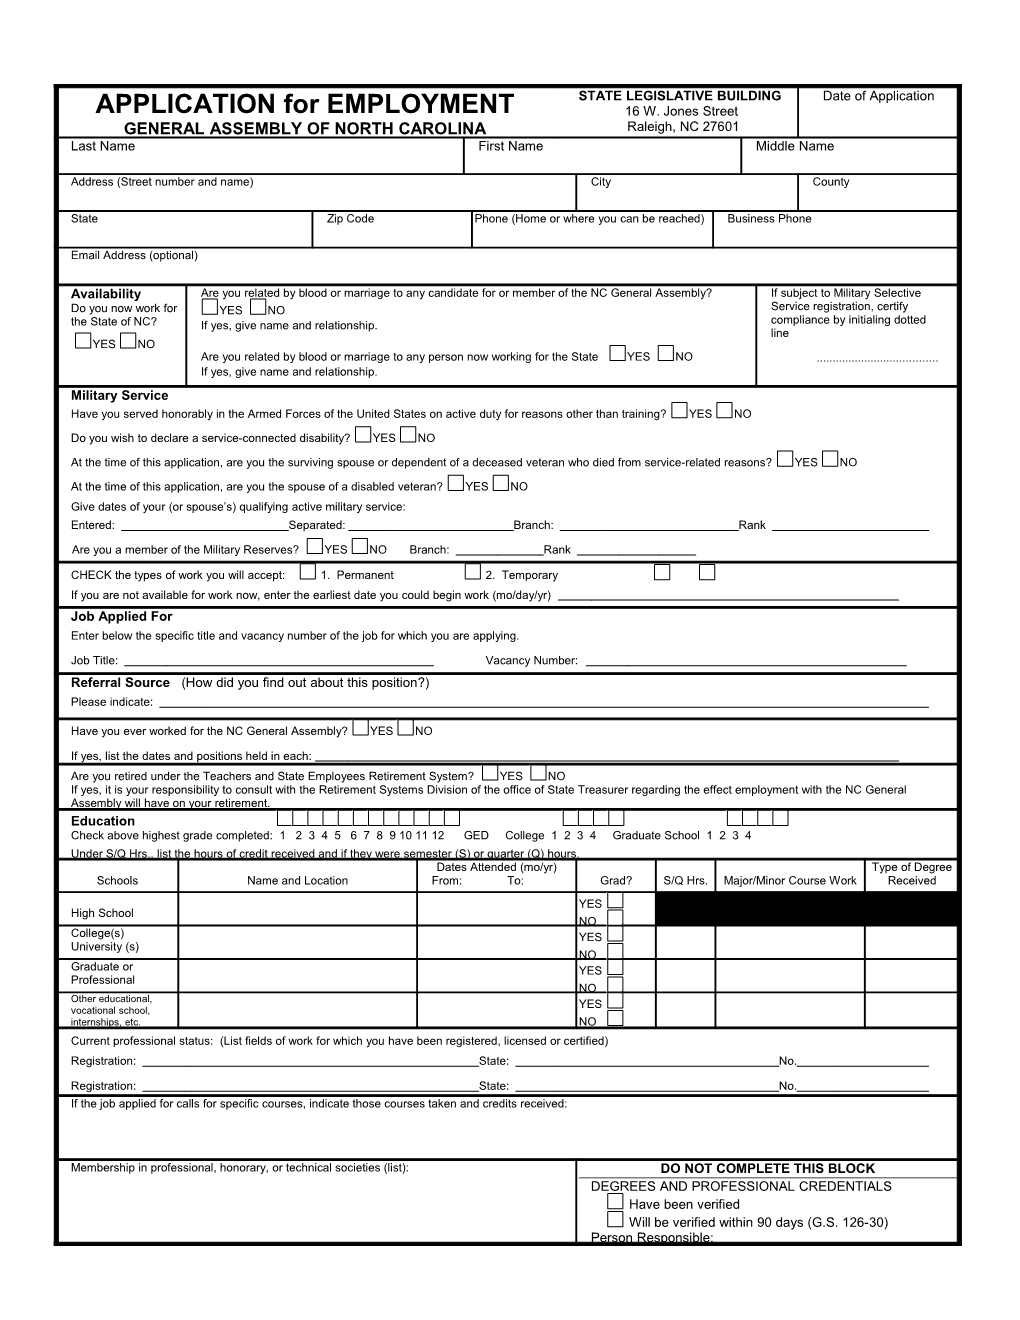 I Certify That I Have Given True, Accurate and Complete Information on This Form to The